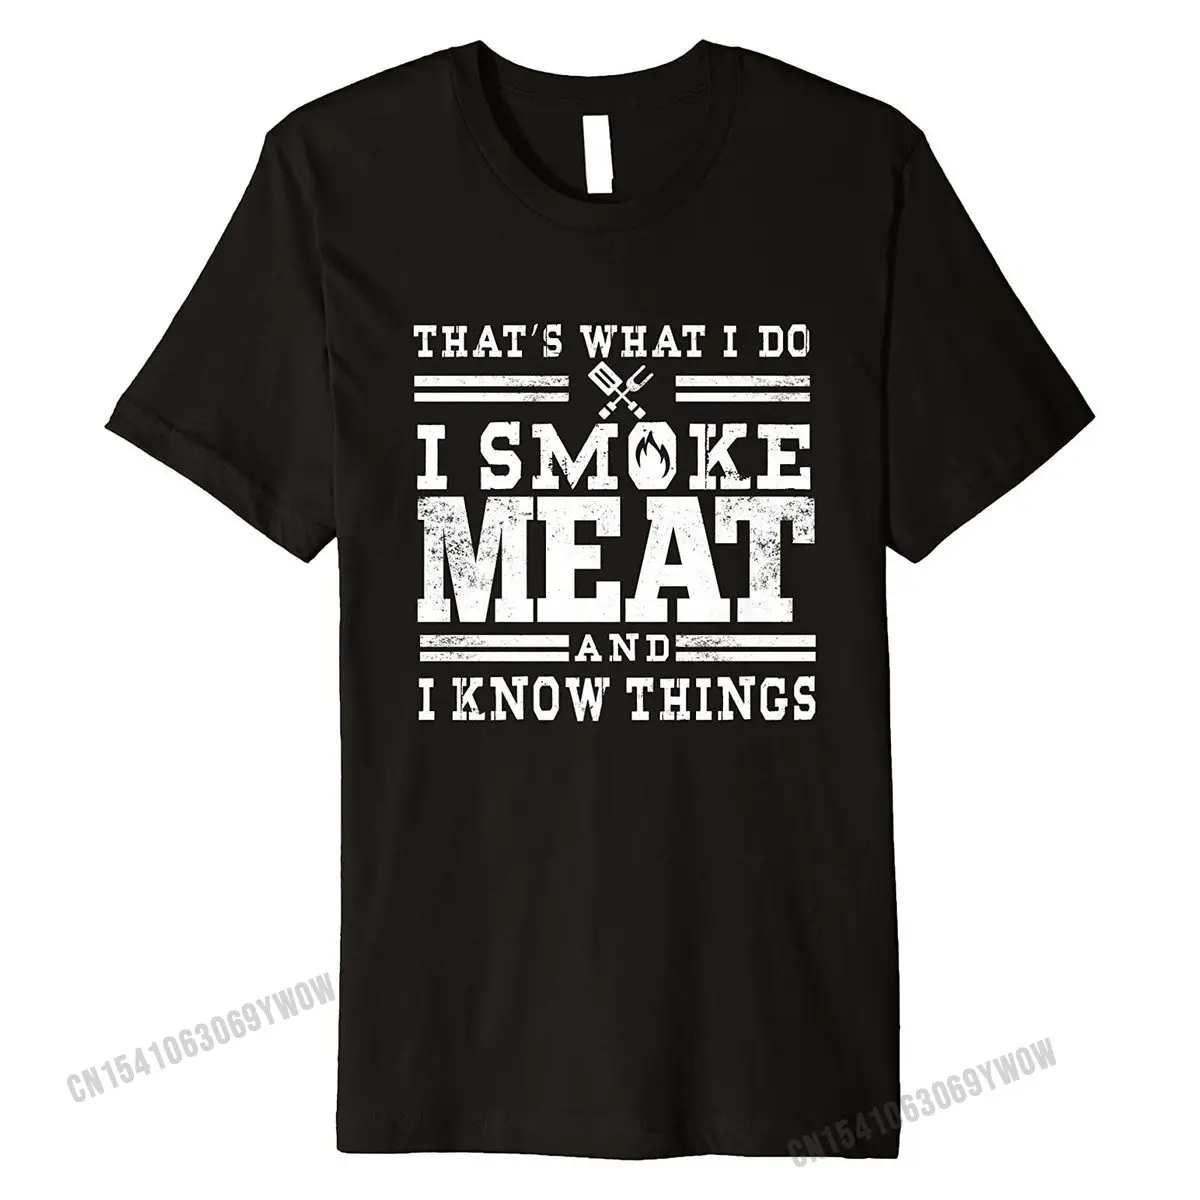 

I Smoke Meat And I Know Things Funny BBQ Smoker Pitmaster Premium T-Shirt Fashionable Hip hop Cotton Tshirts for Men Leisure